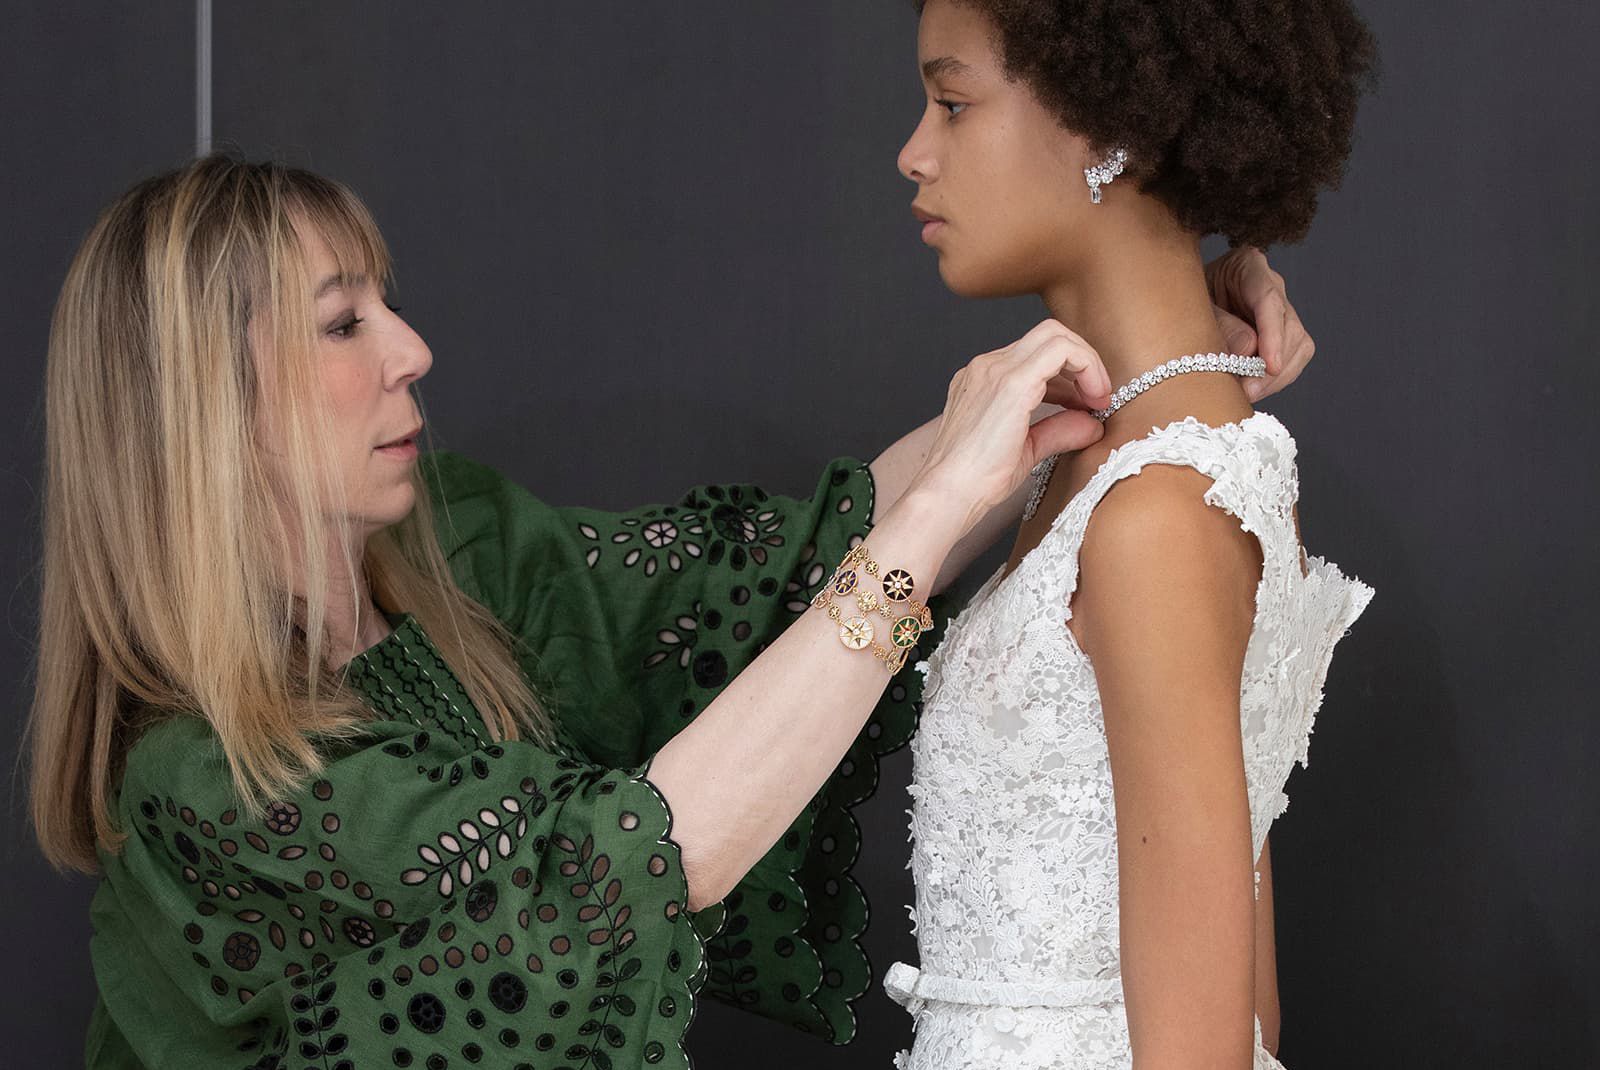 Dior Joaillerie's creative director Victoire de Castellane adjusting on a model a High Jewellery necklace in white gold and diamonds from the Les Jardins de la Couture High Jewellery collection 